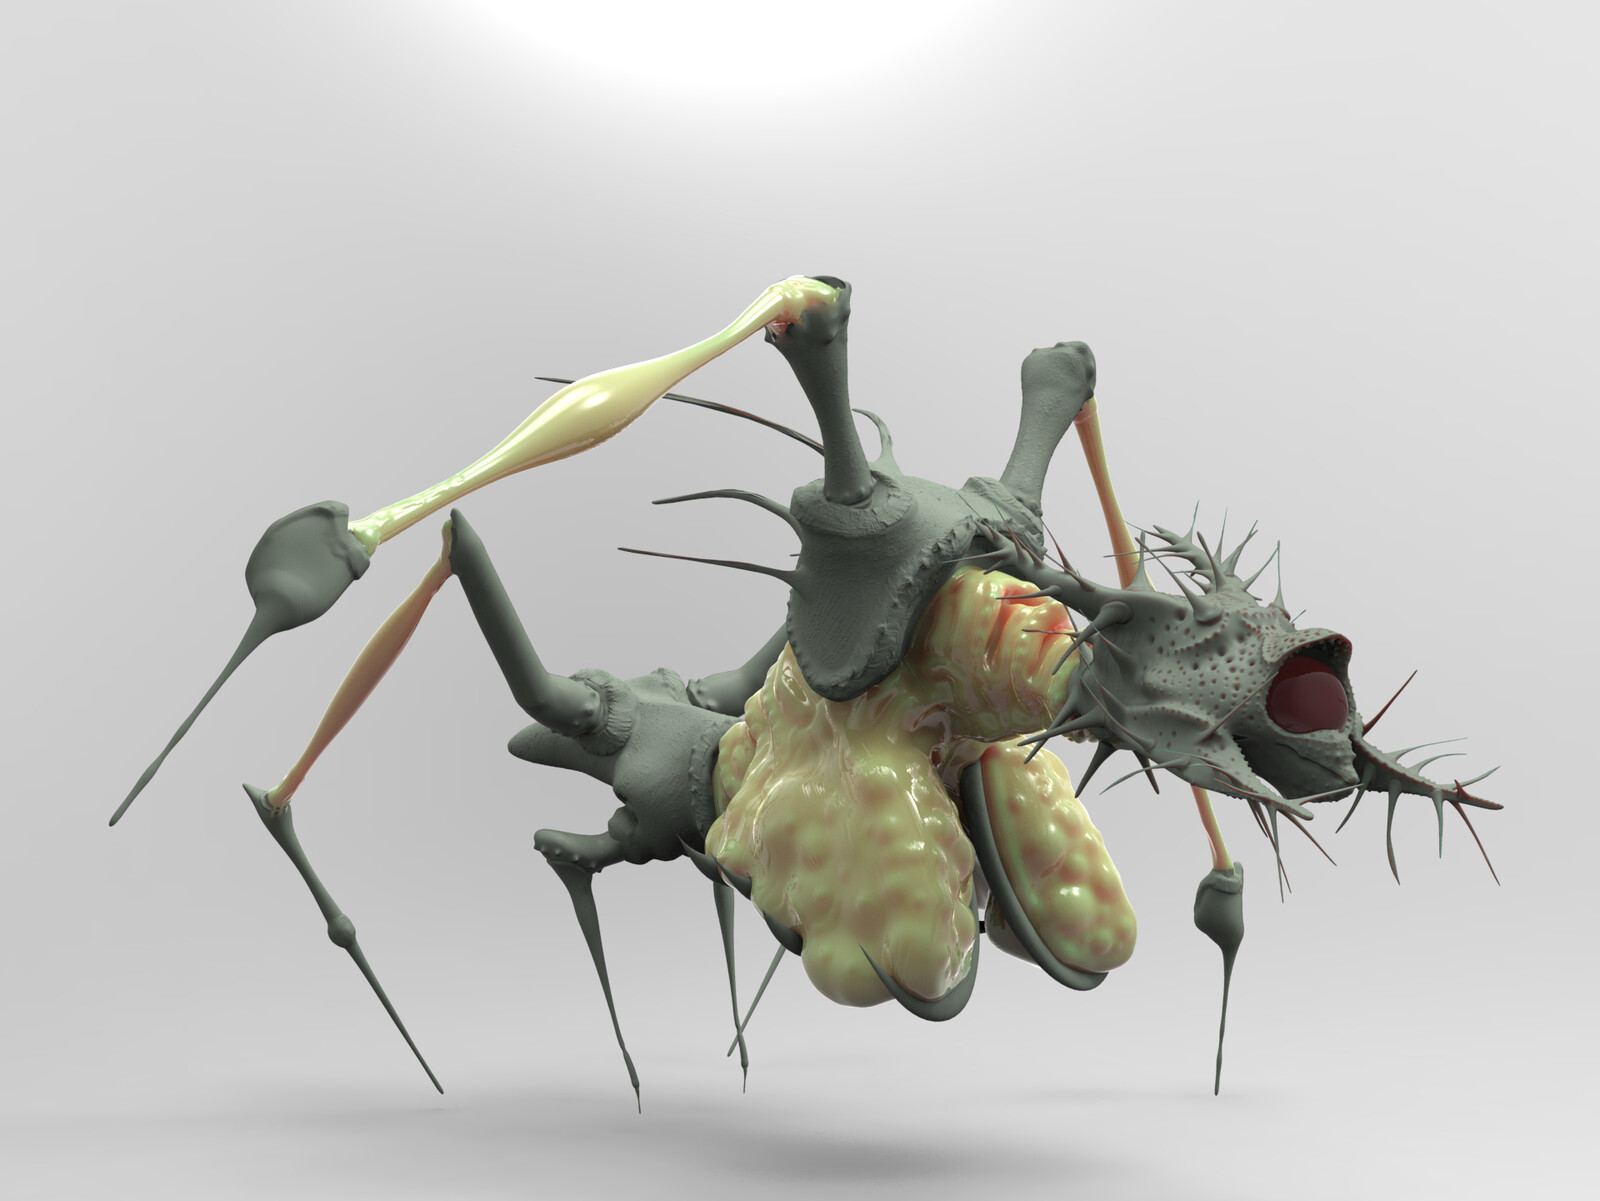 Insectoid - Insect sculpting study and render